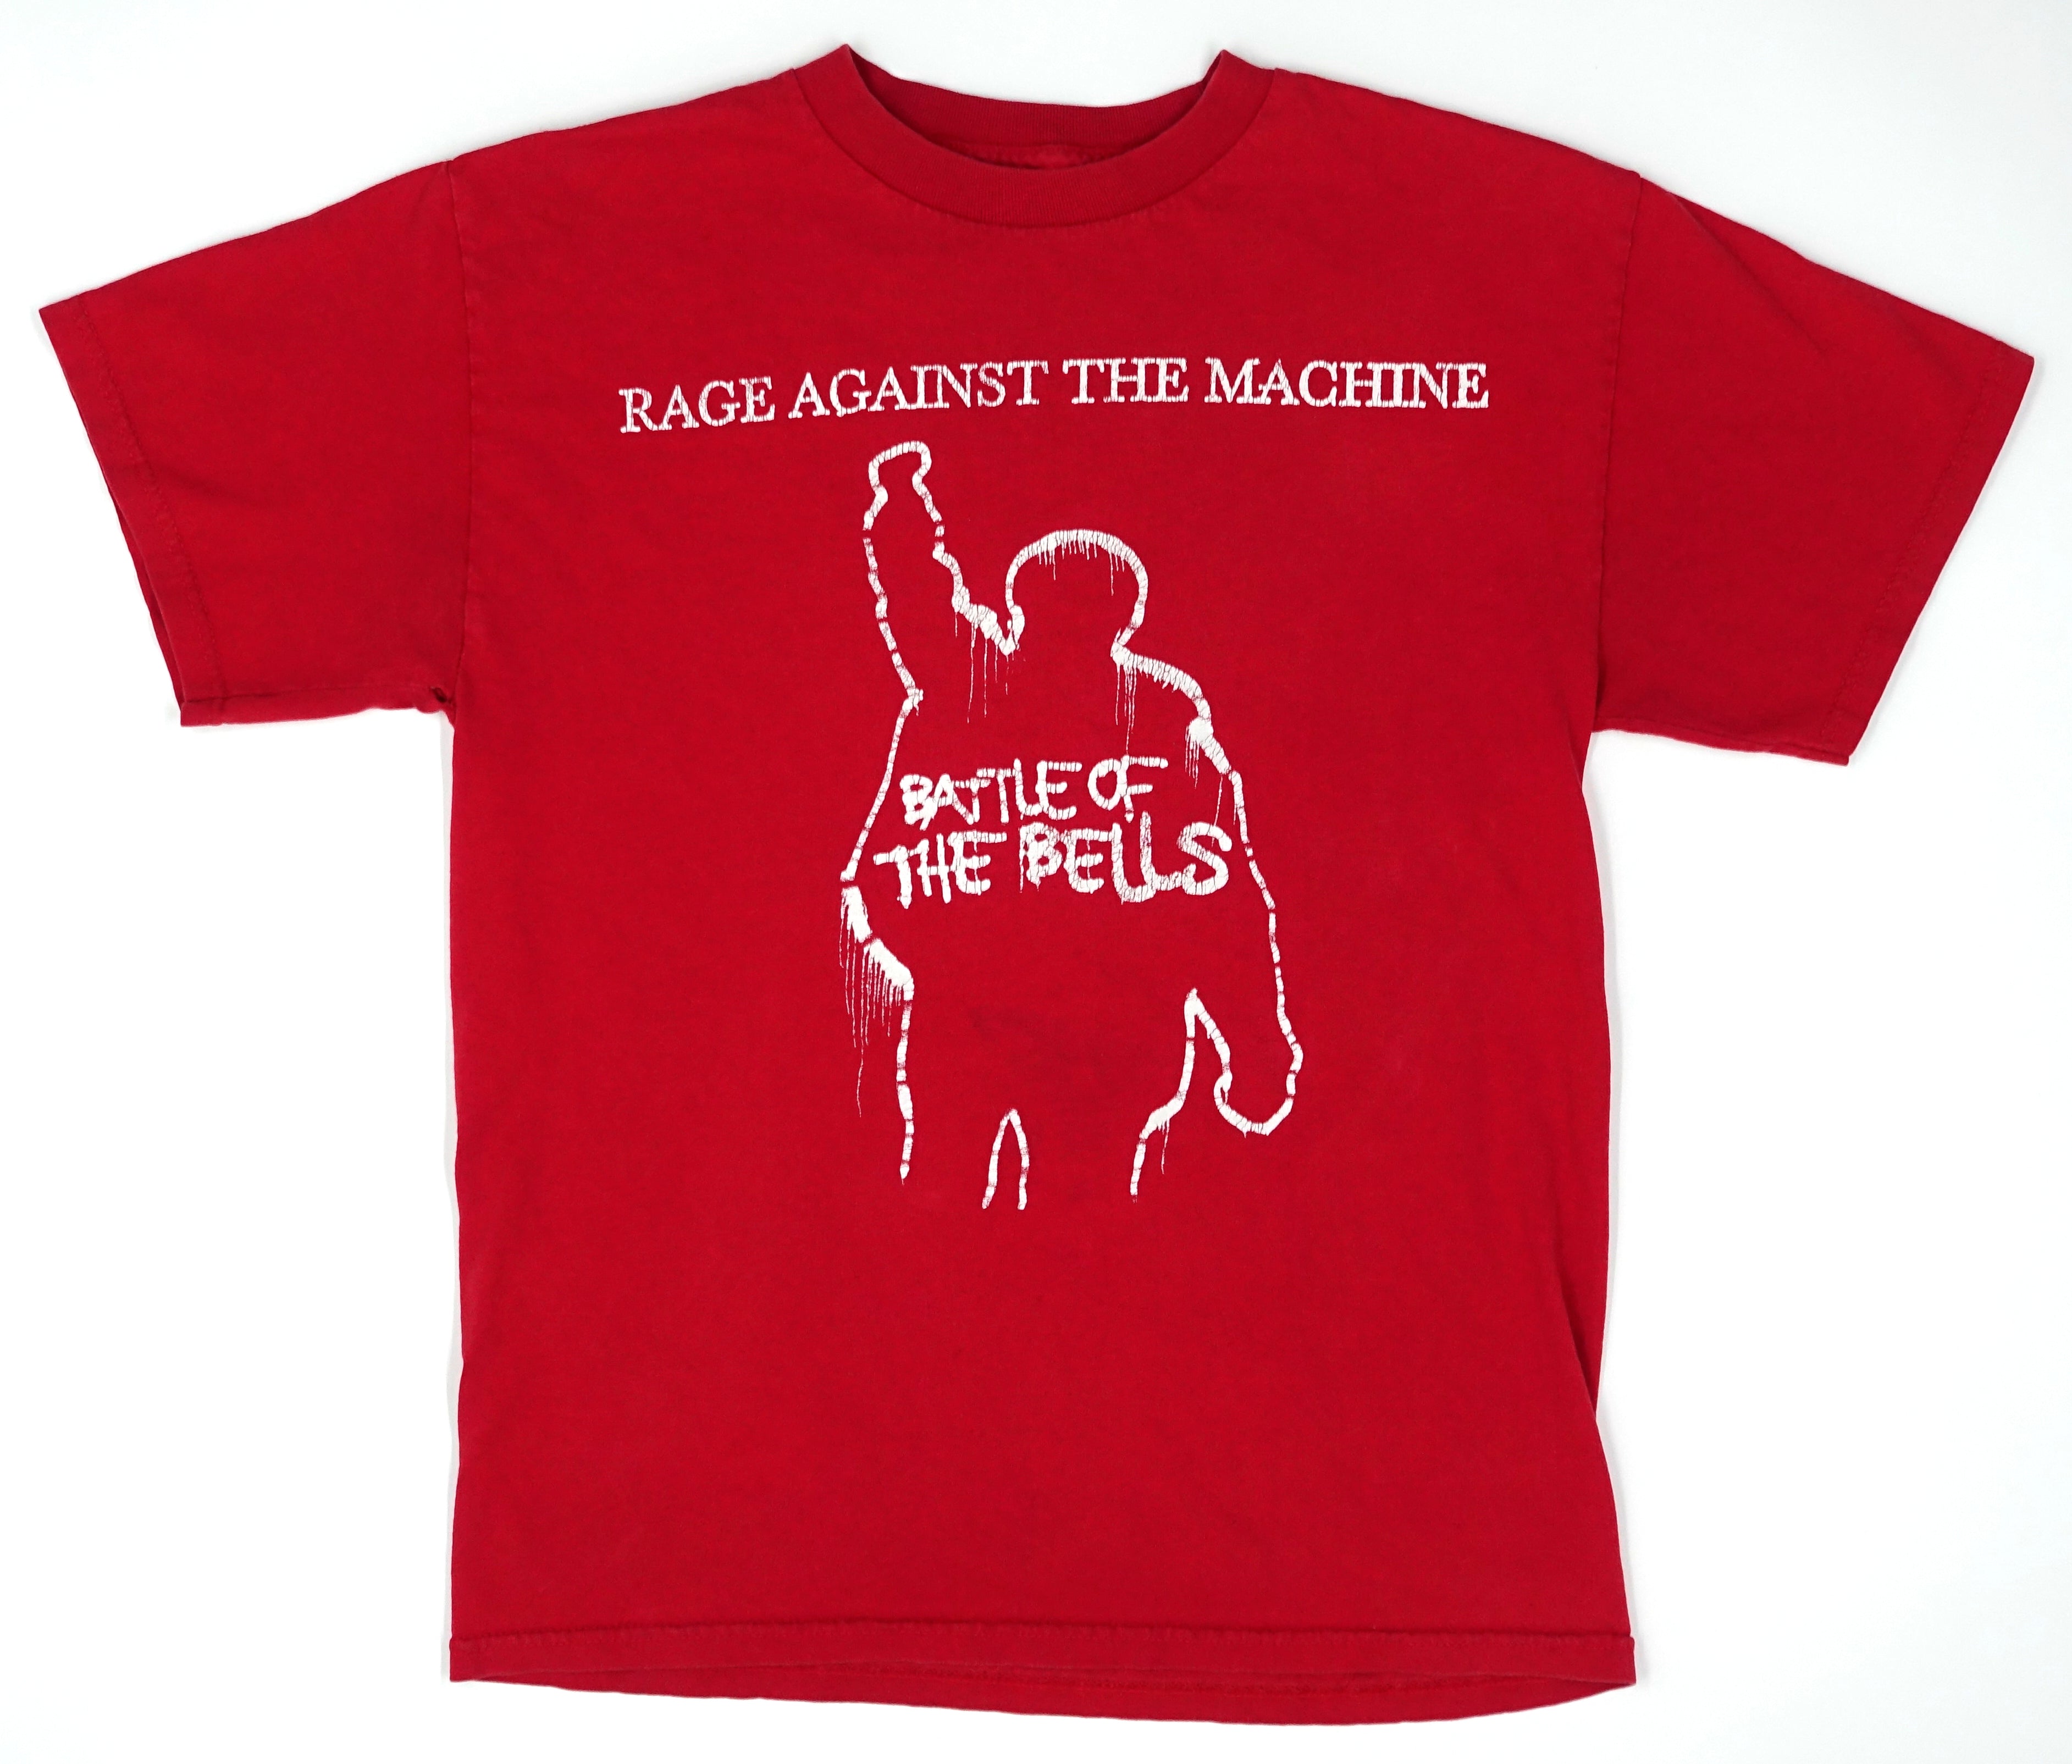 Rage Against The Machine – The Battle Of the Bells 2007 Tour Shirt Size Medium